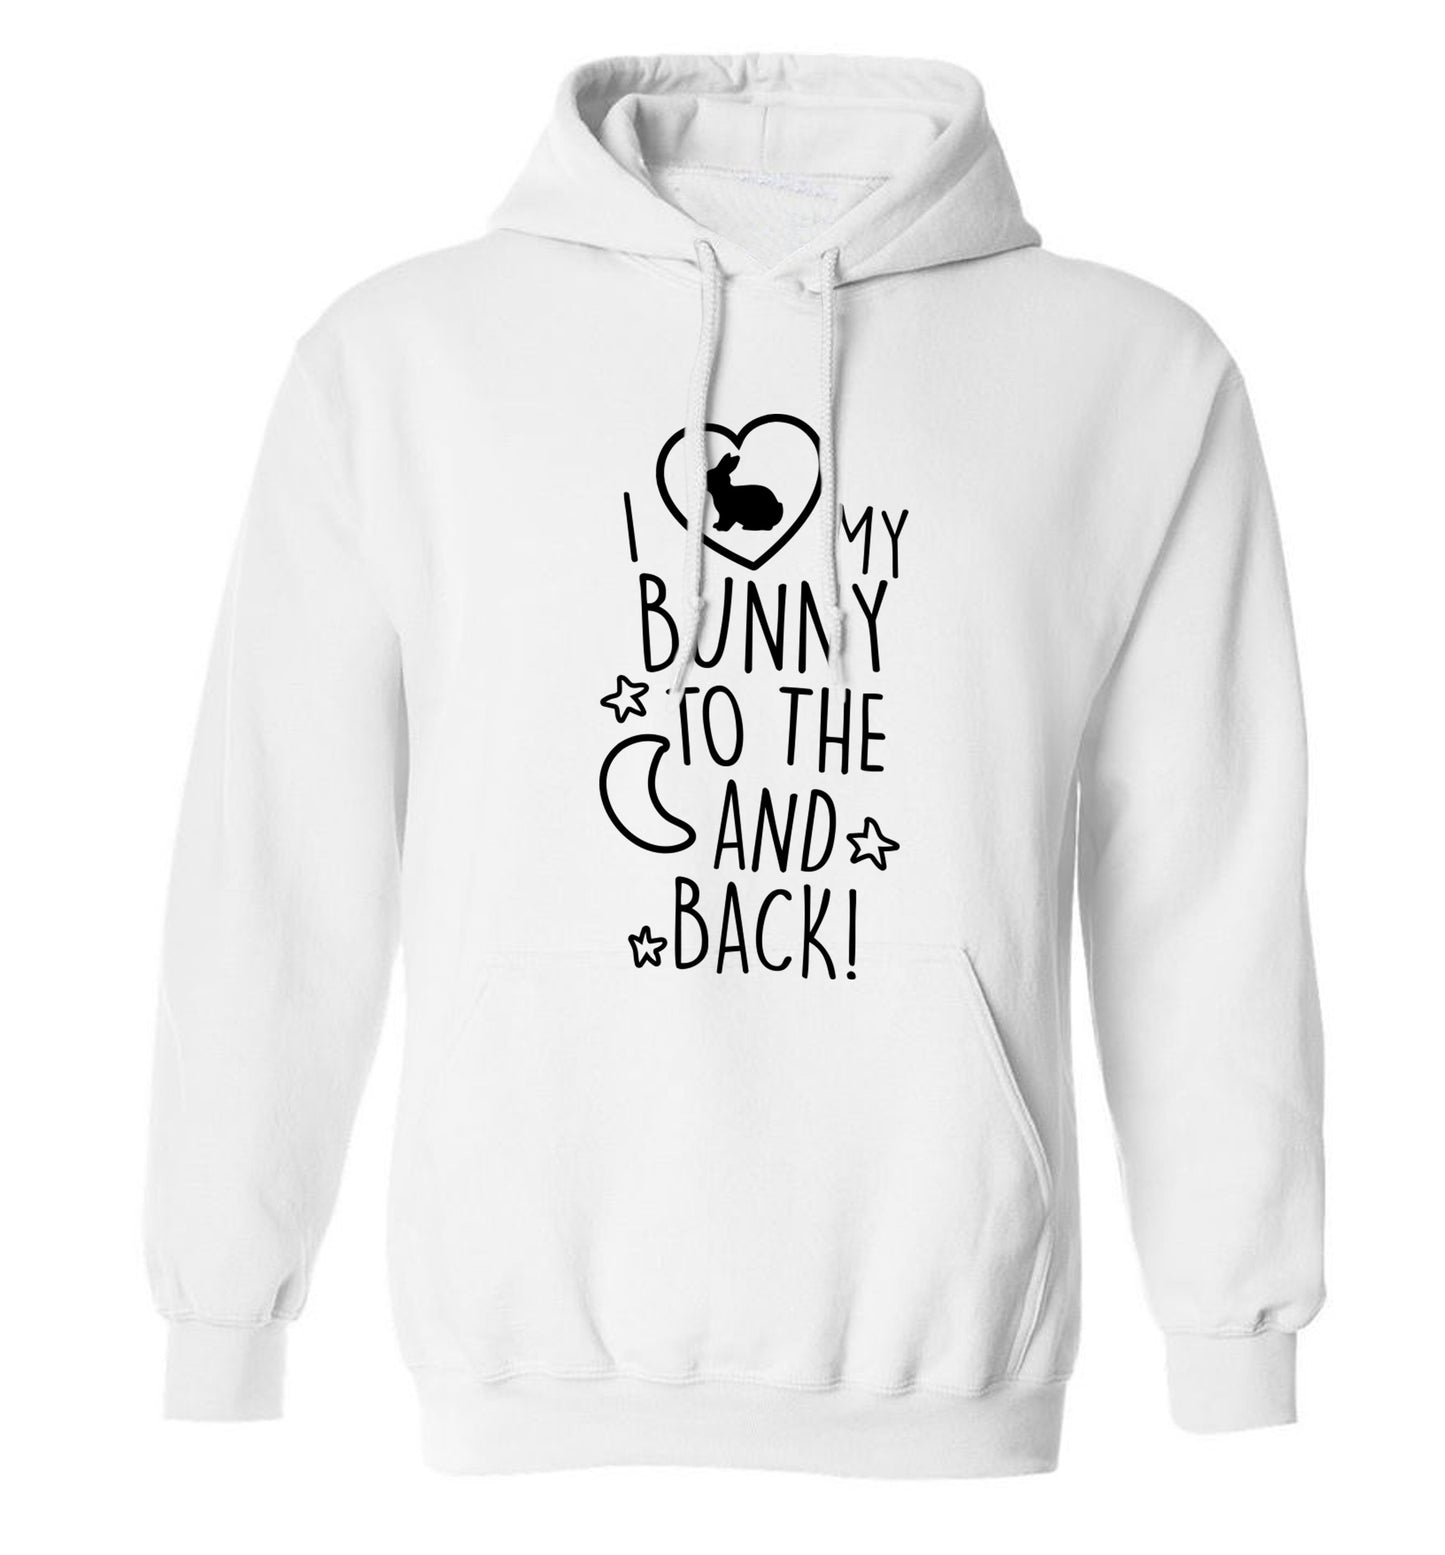 I love my bunny to the moon and back adults unisex white hoodie 2XL